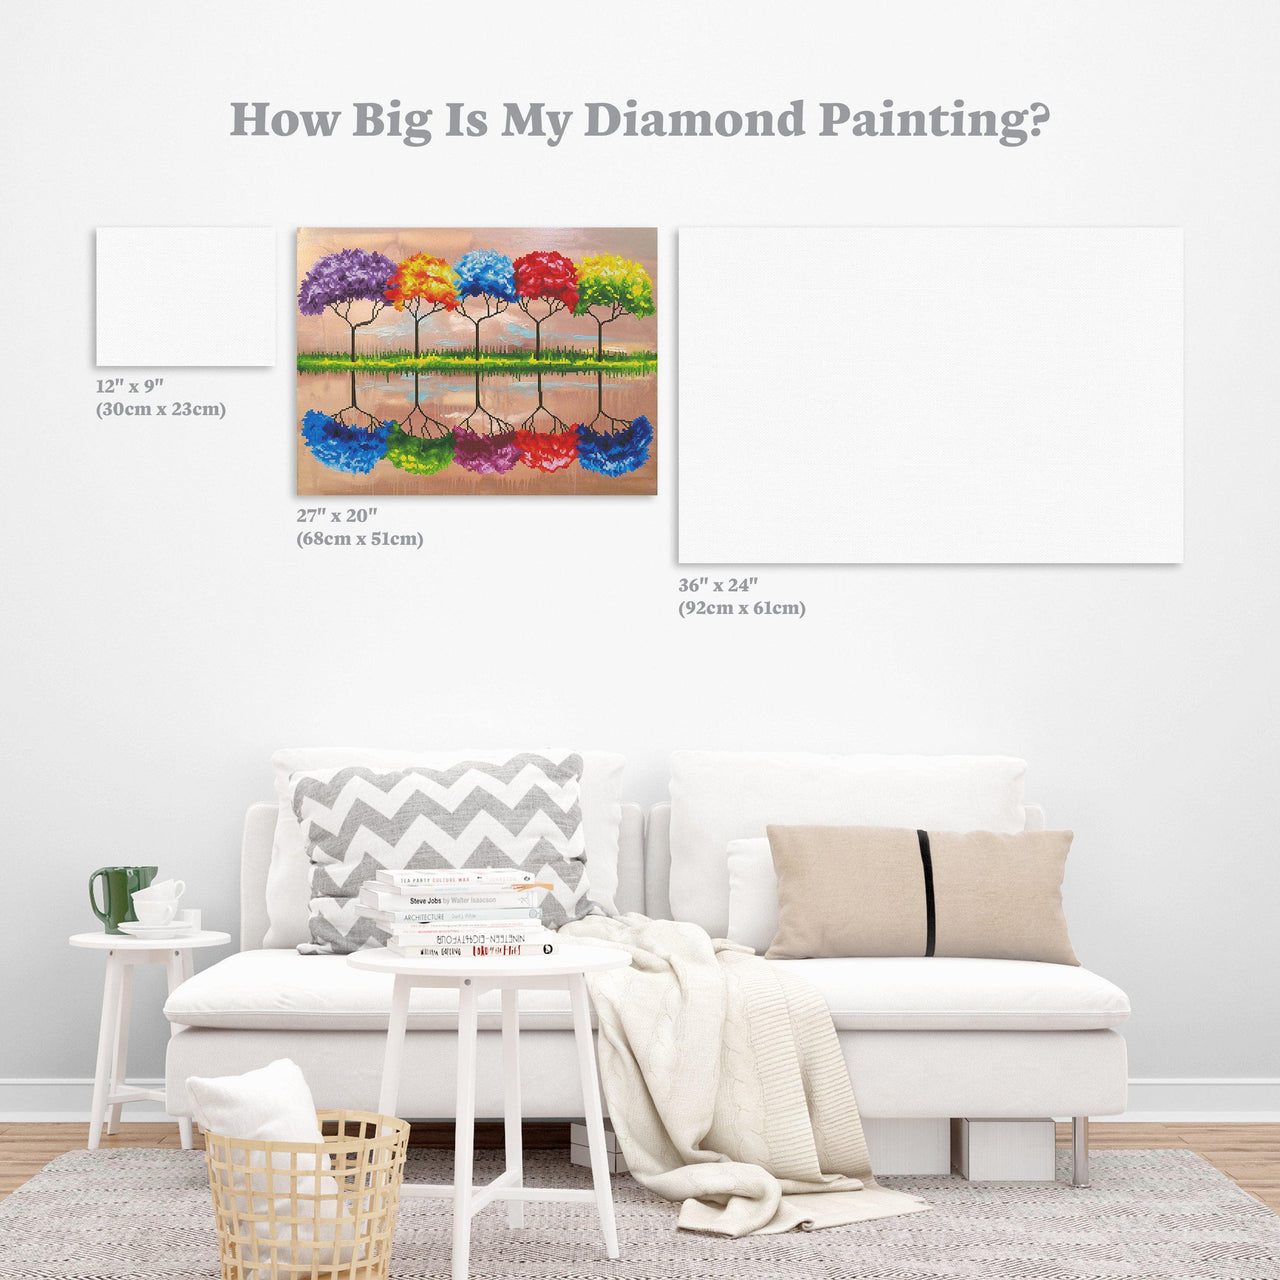 Diamond Painting Full Bloom 27" x 20″ (68cm x 51cm) / Round with 48 Colors including 3 ABs / 18,208